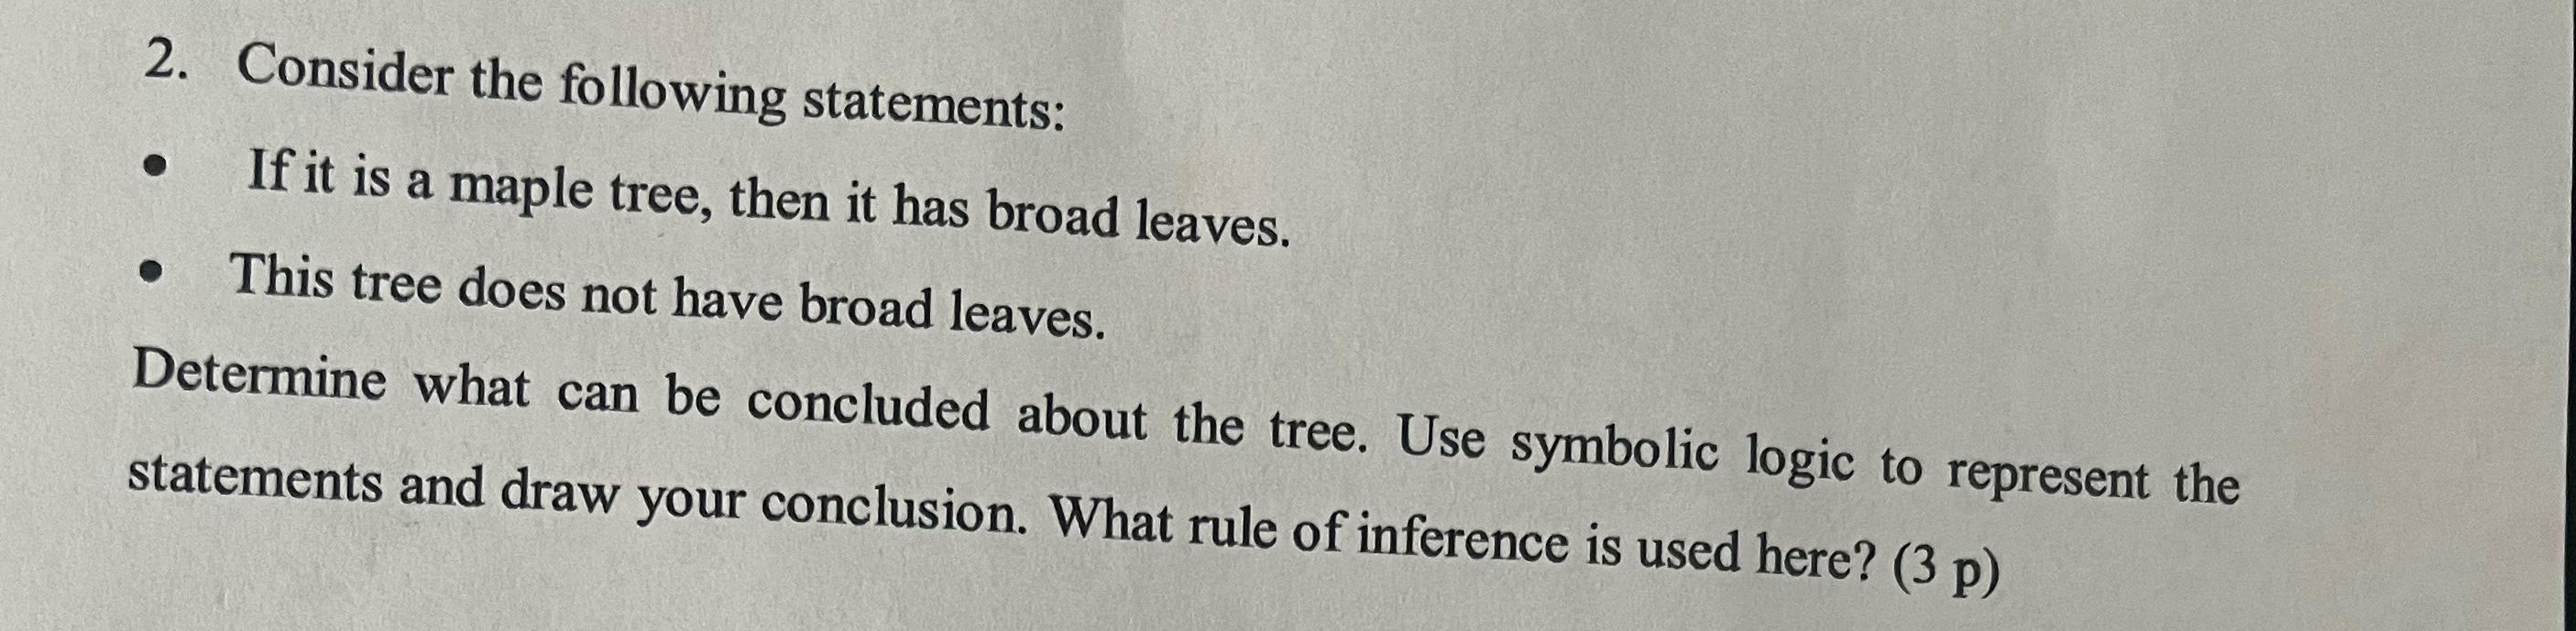 2. Consider the following statements: If it is a maple tree, then it has broad leaves. This tree does not